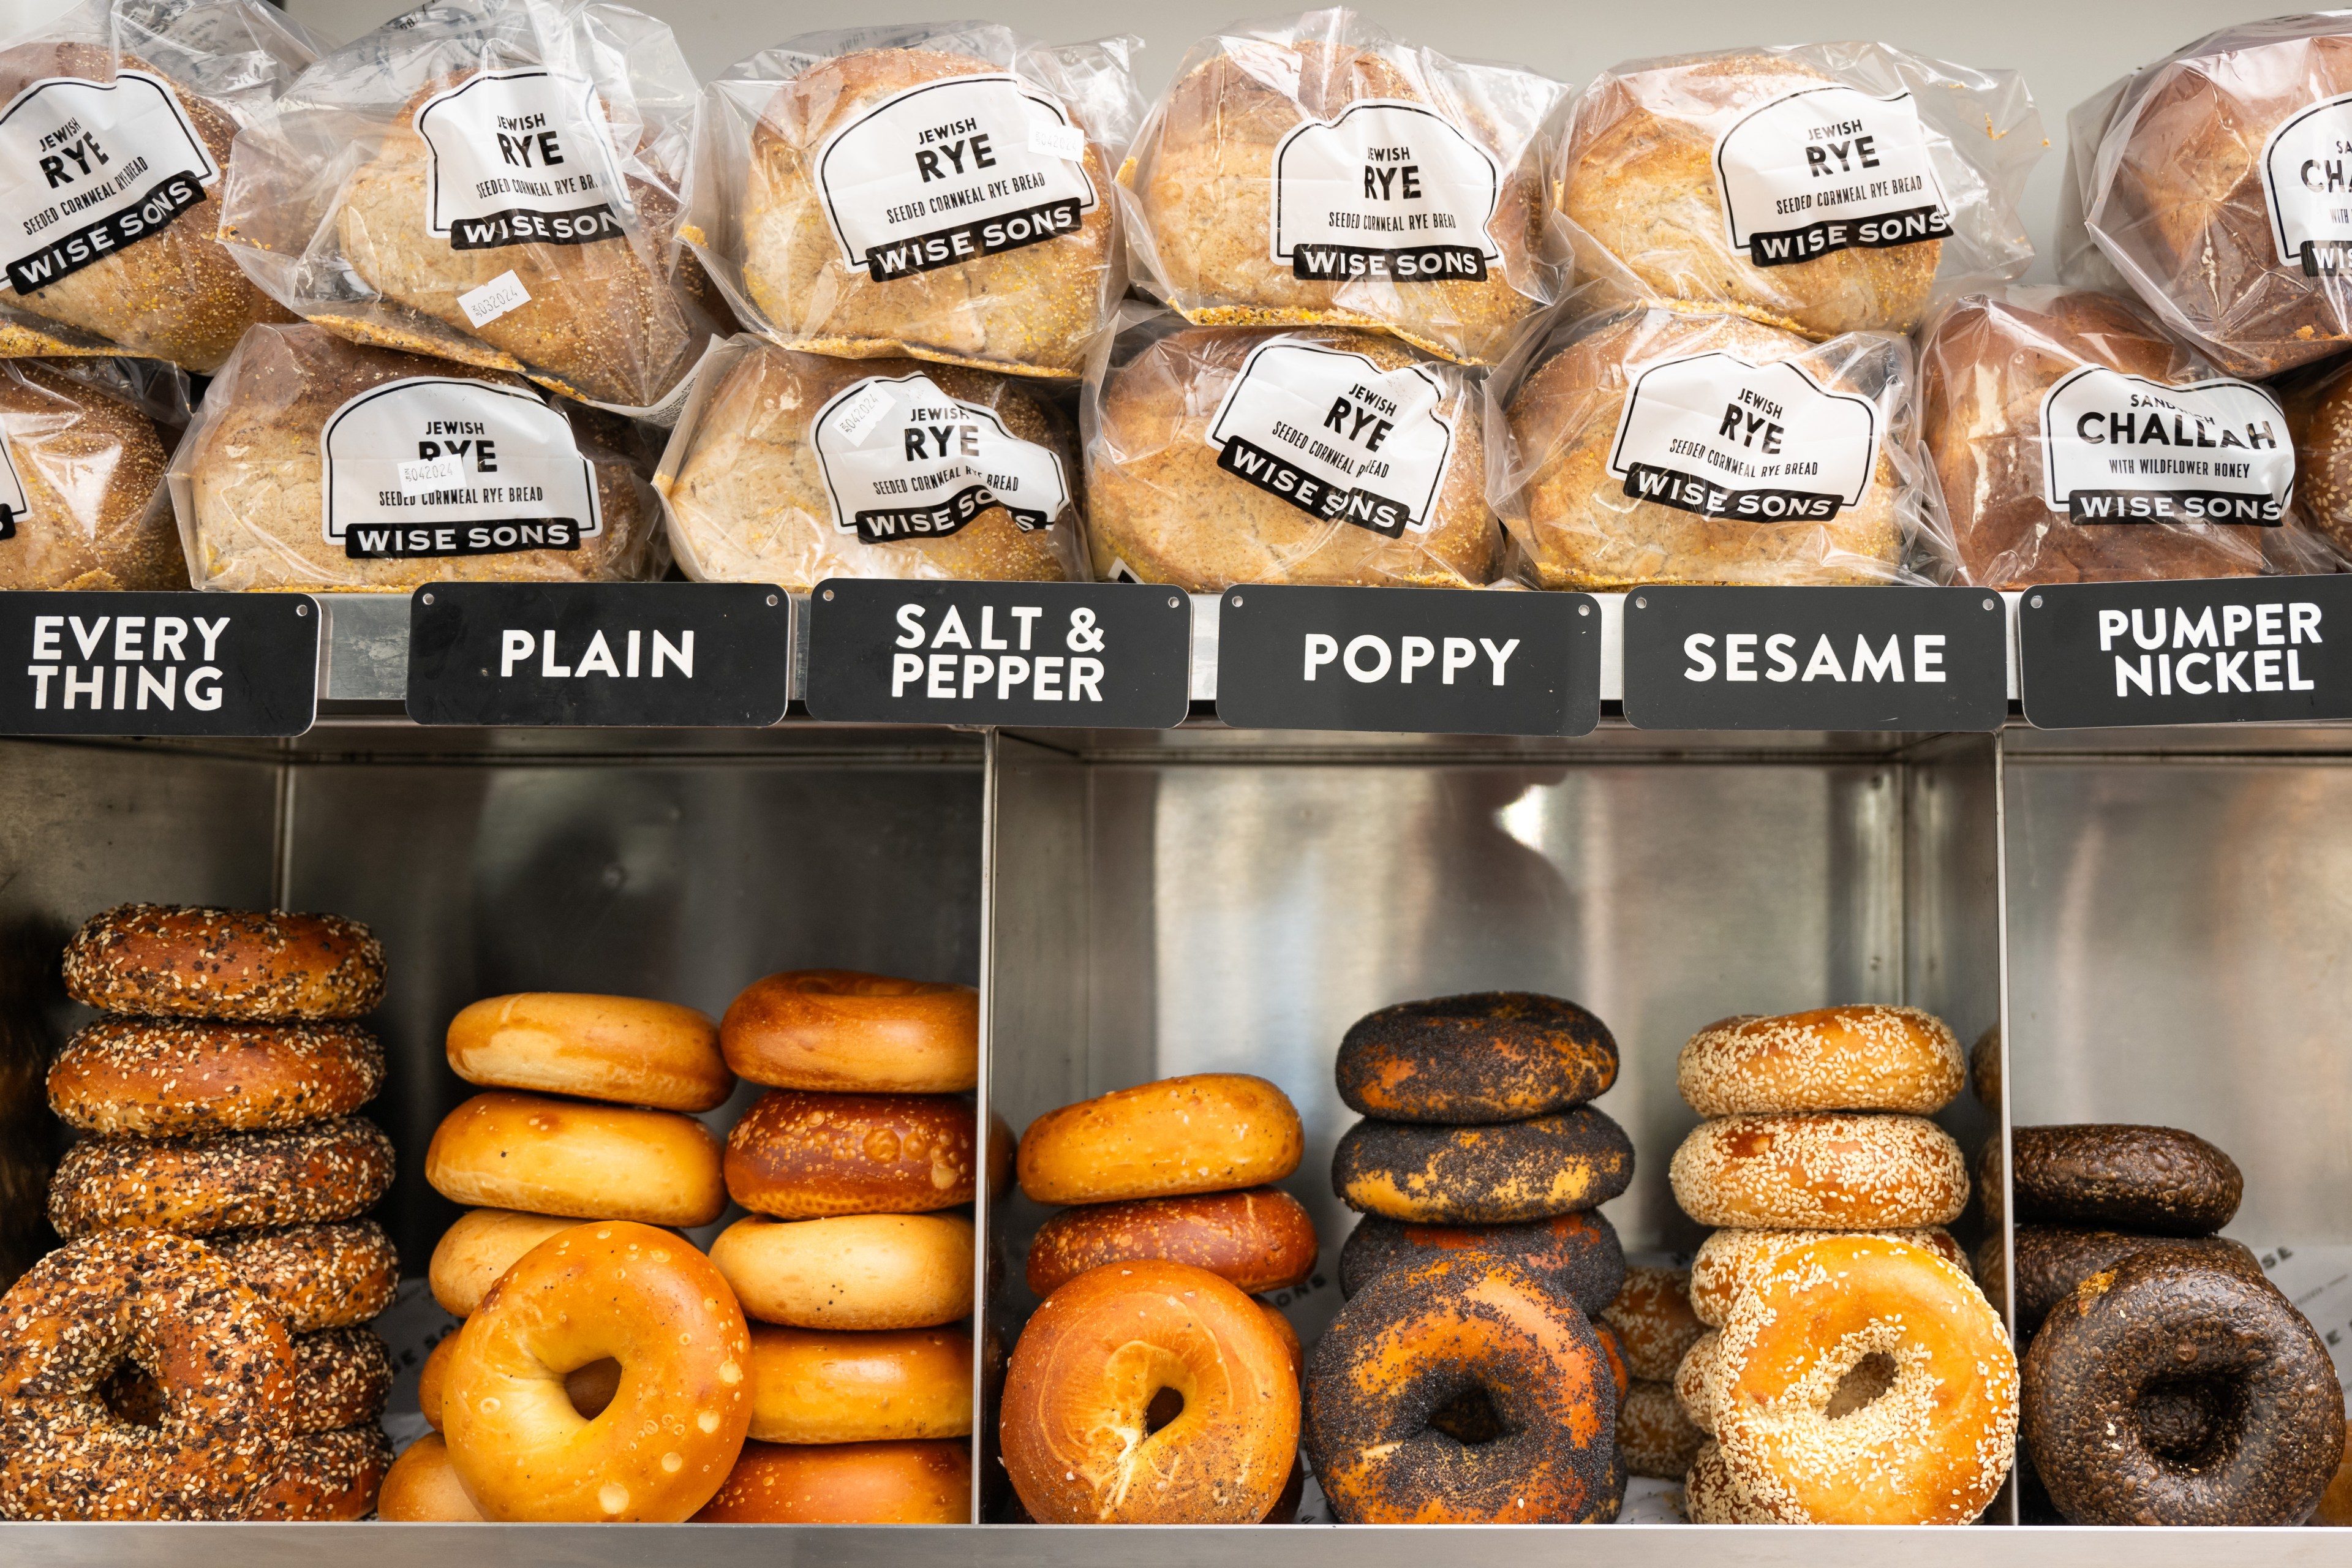 A selection of bagels at Wise Sons including loose bagels and bagged bagels.